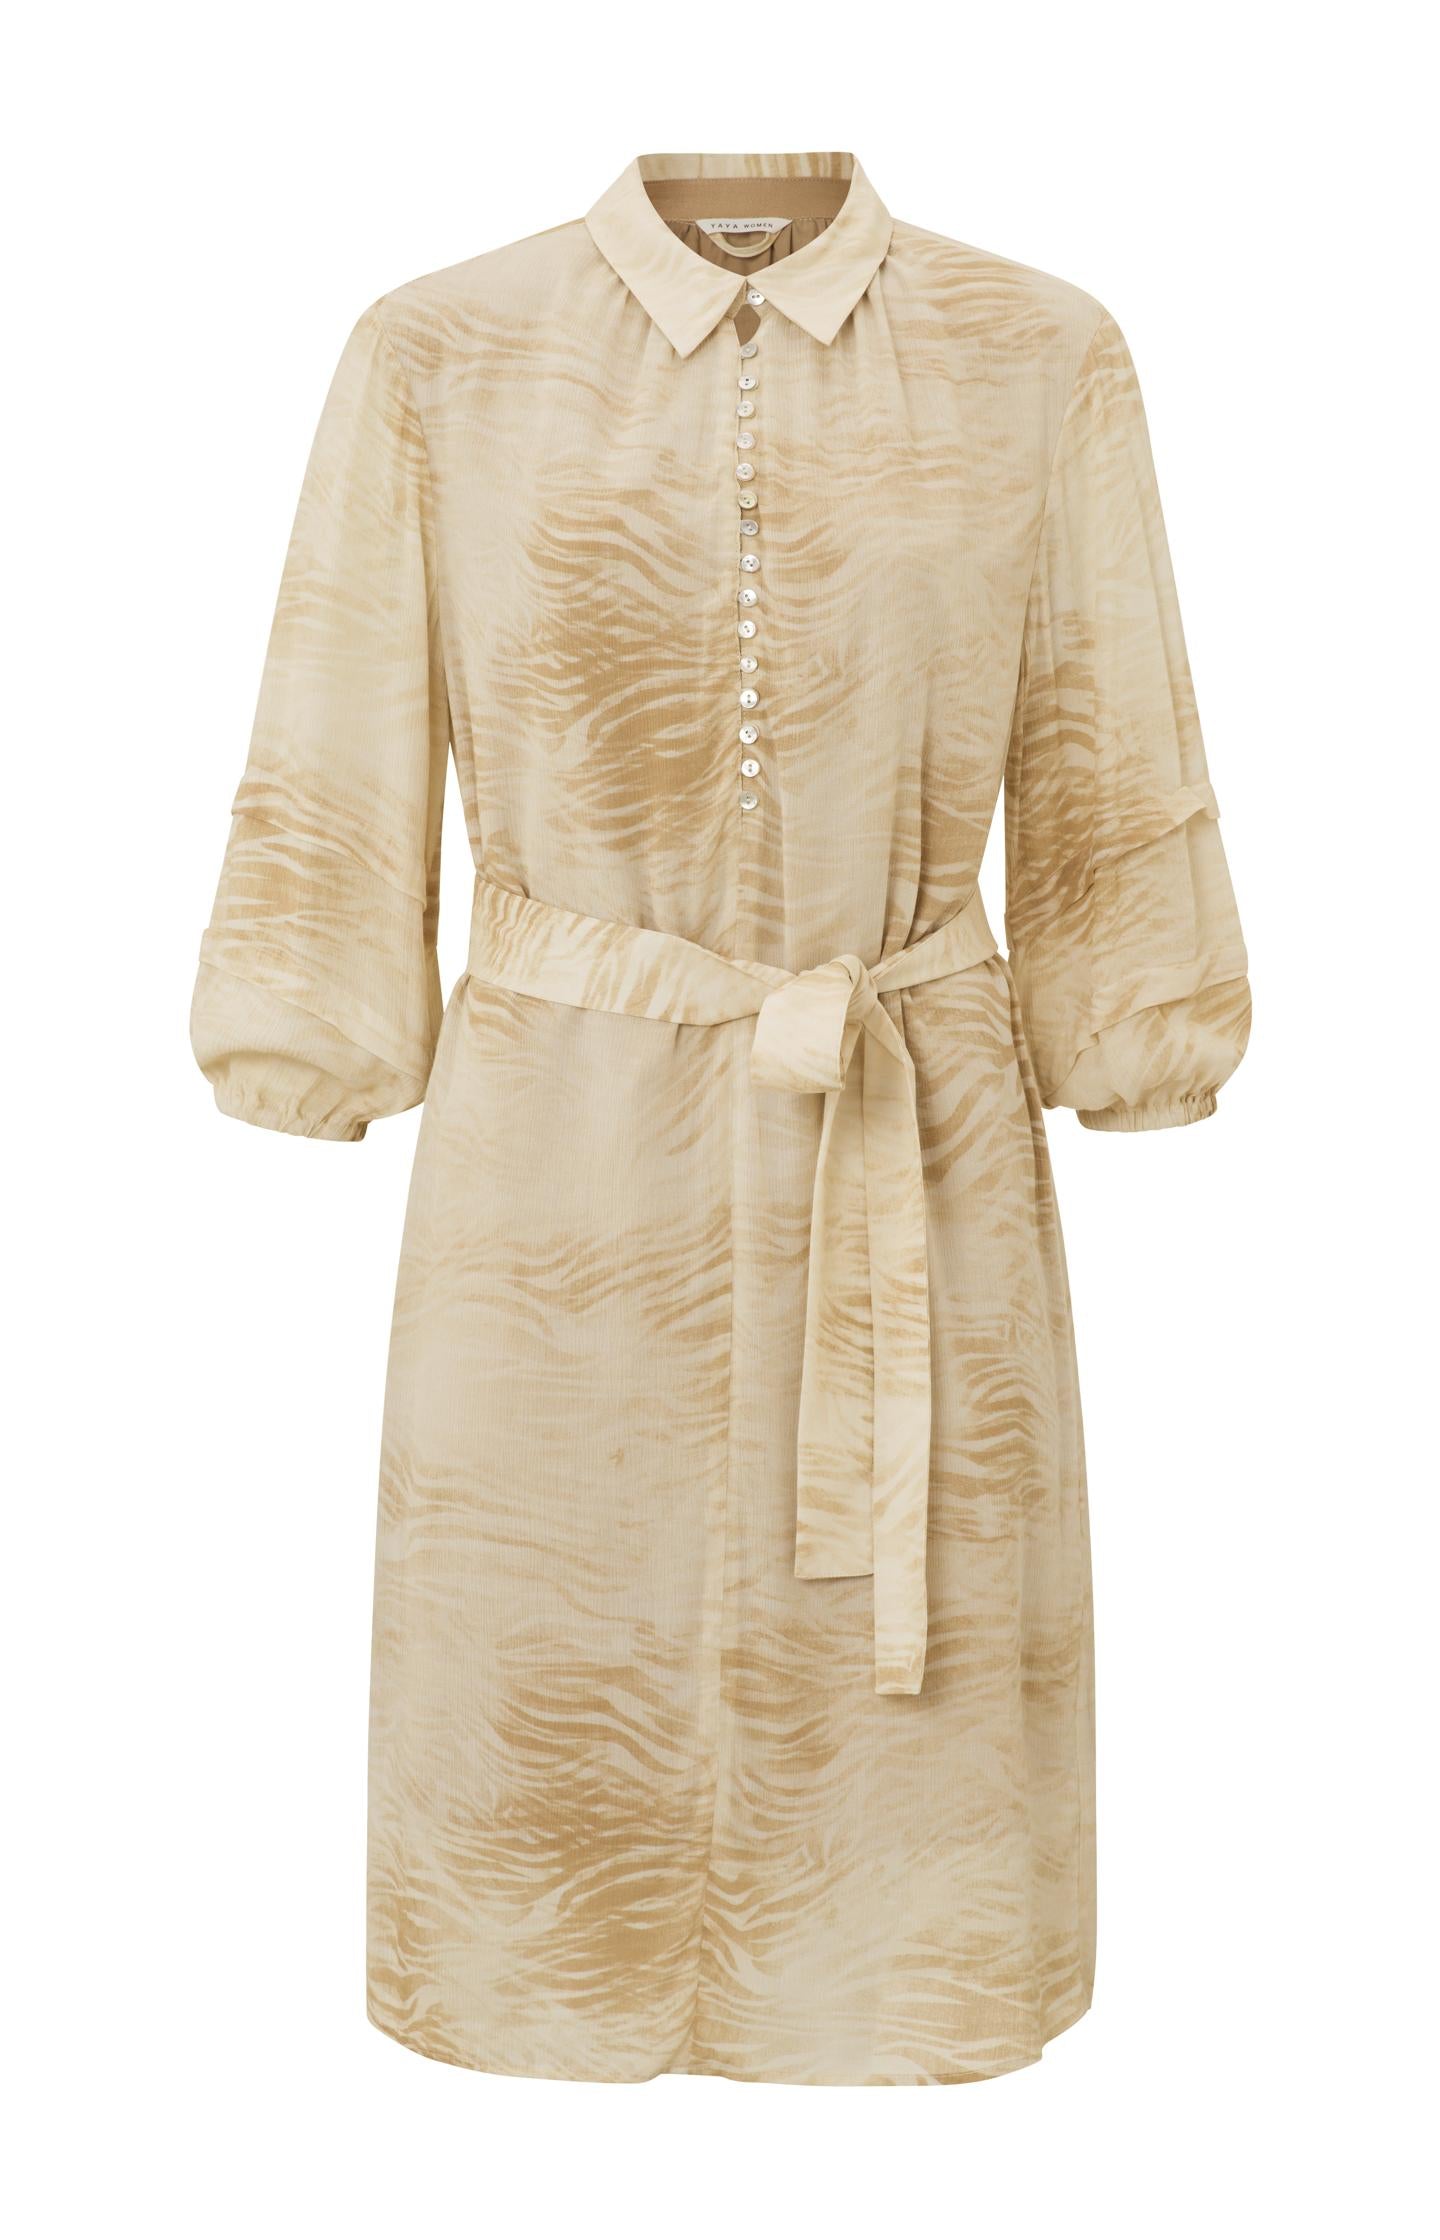 Yaya Summer Sand Dessin Dress with Long Balloon Sleeves and Buttons